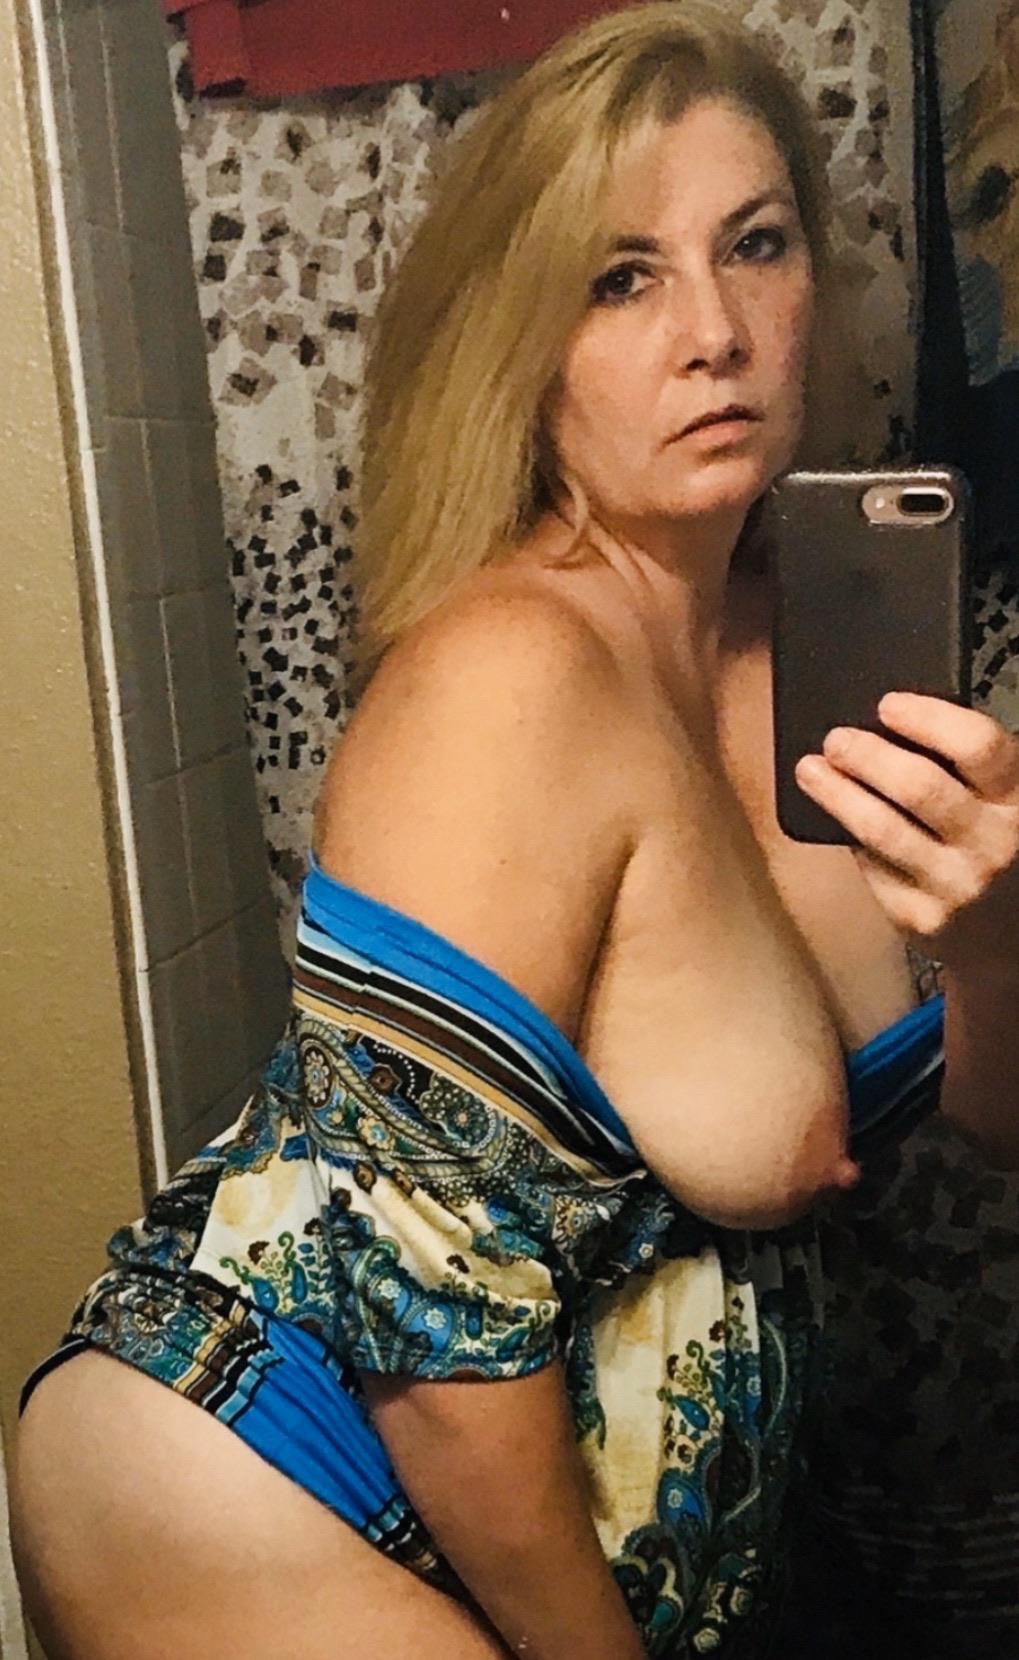 Tits out selfie